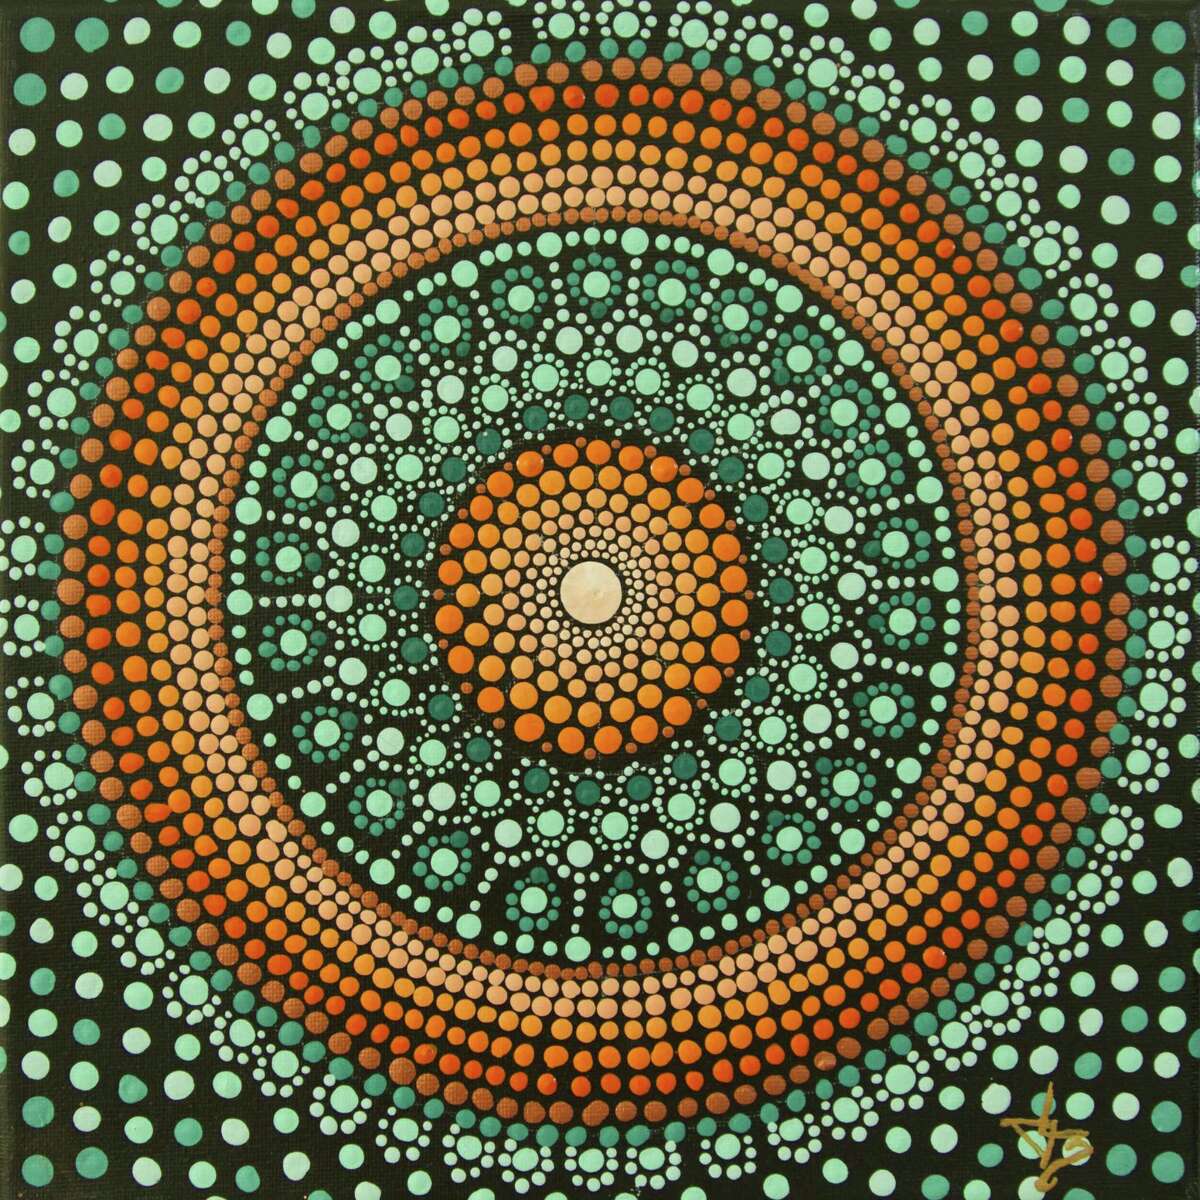 Above, “Orange Wheel on Teal,” acrylic with high gloss varnish on gallery wrapped canvas, by Deborah Churchill.